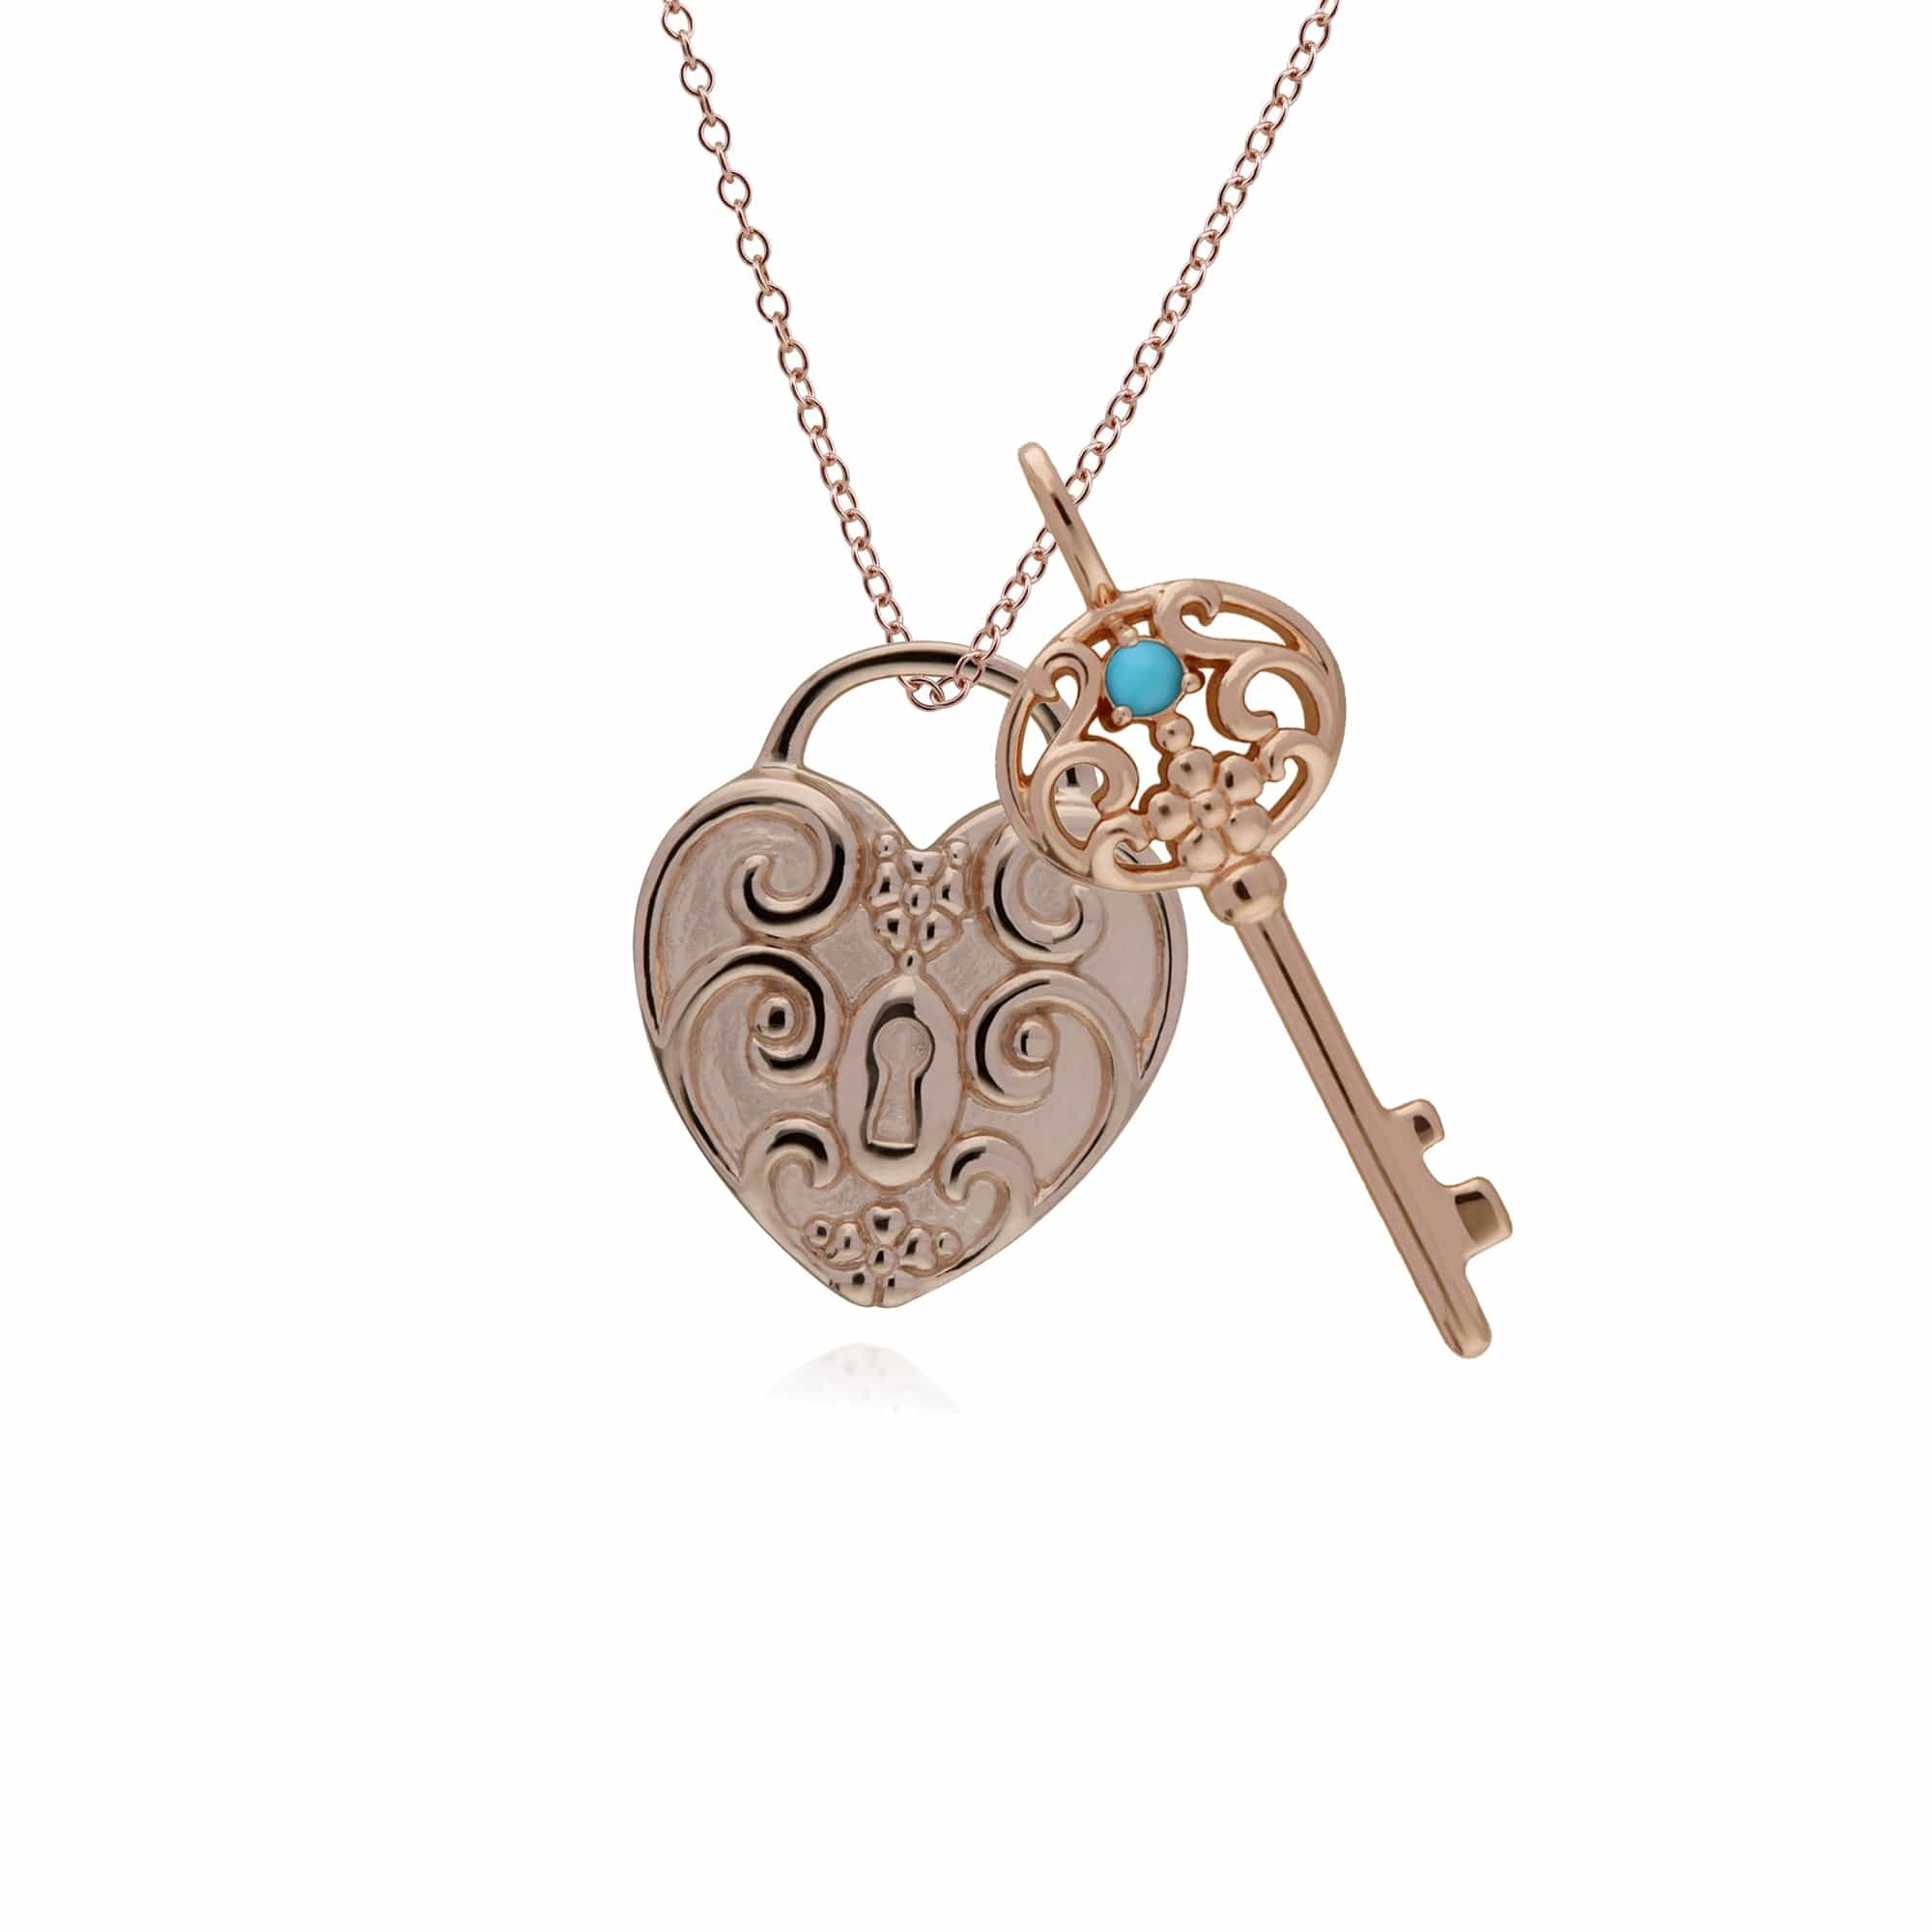 270P026714925-270P026501925 Classic Swirl Heart Lock Pendant & Turquoise Big Key Charm in Rose Gold Plated 925 Sterling Silver 1